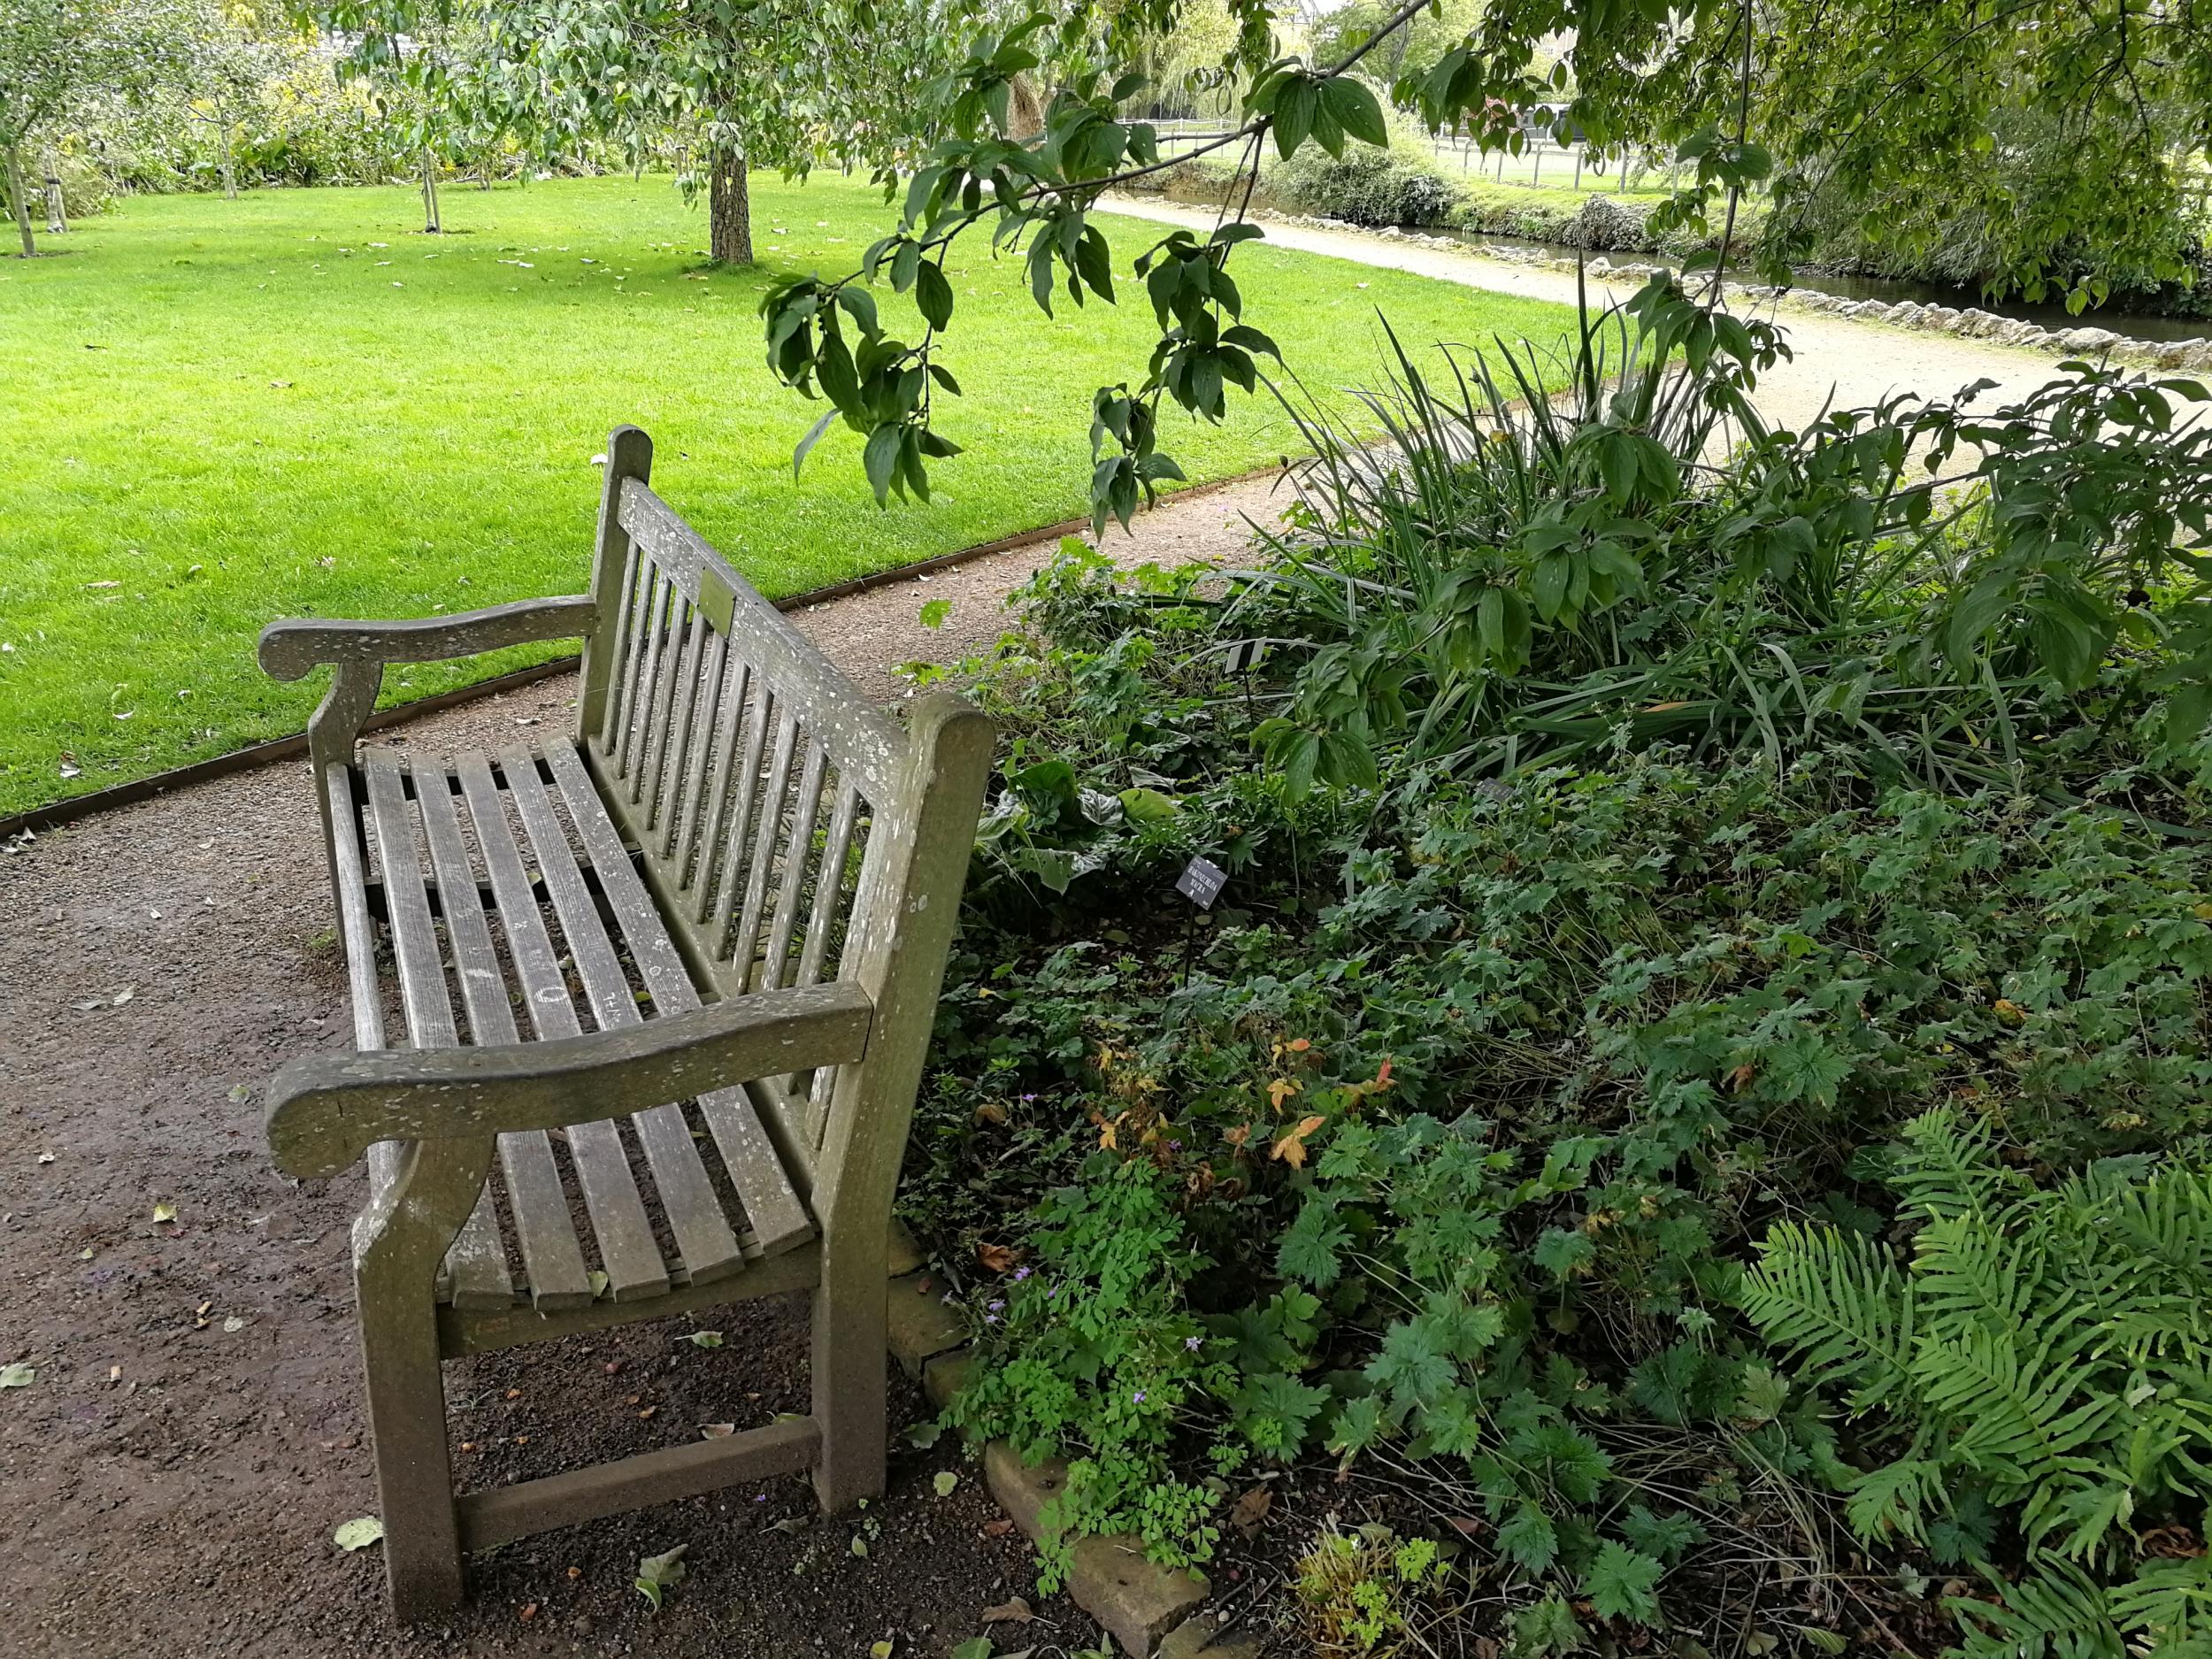 Lyra and Will's bench in the Botanic Gardens, where they will meet once a year in separate worlds